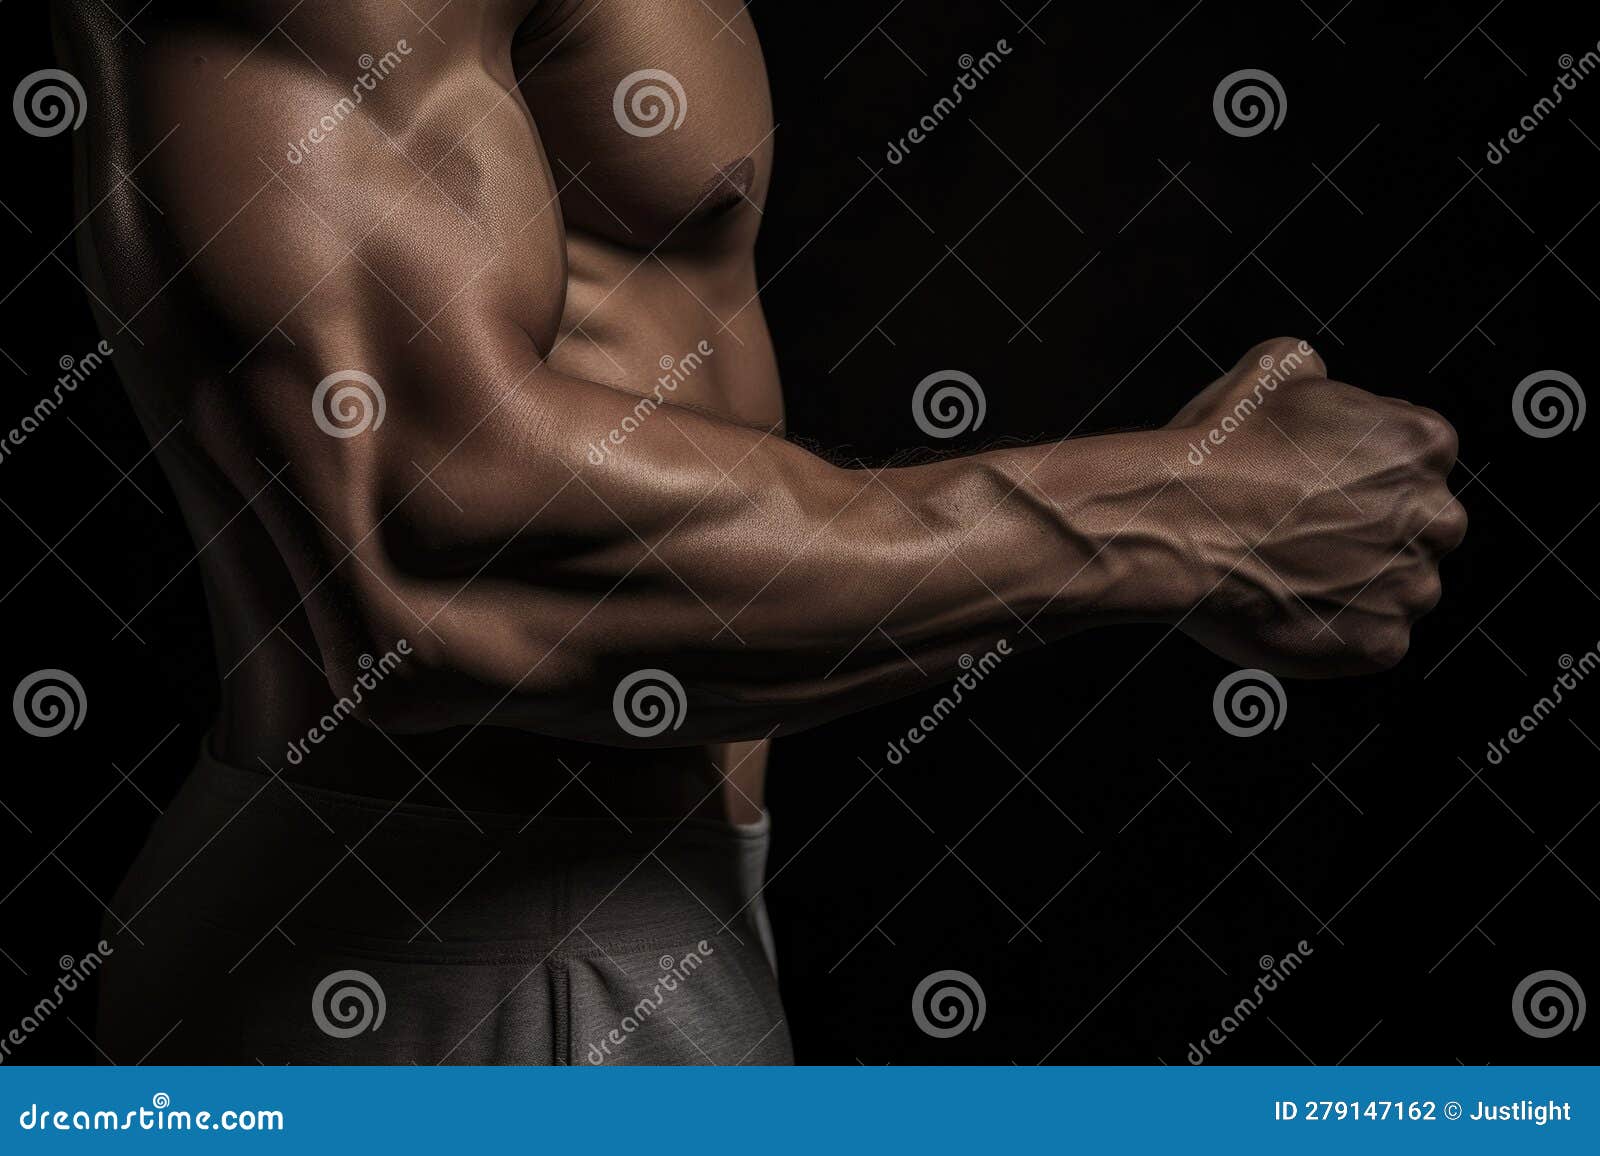 Firm and Defined Biceps a Testimony To Passion and Resolve. Stock